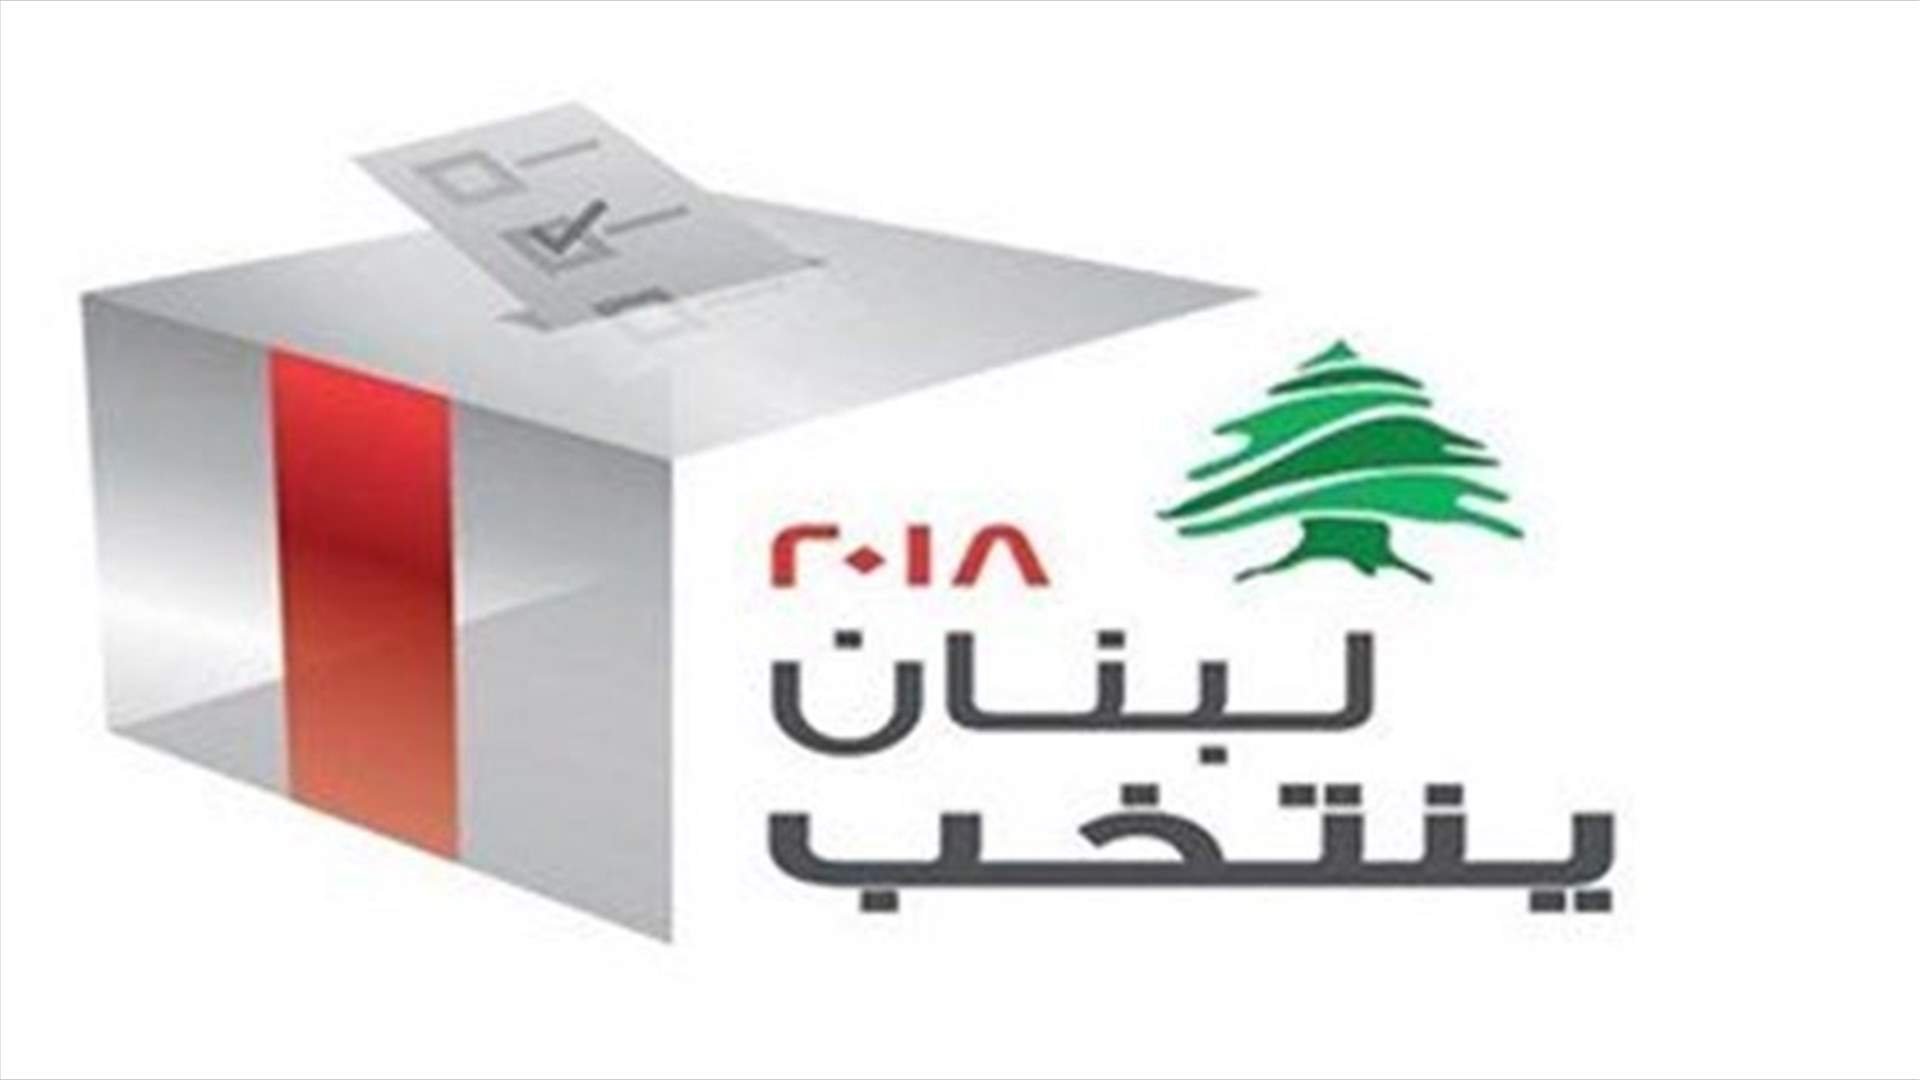 [PHOTO] Unofficial results of Lebanon’s parliamentary elections